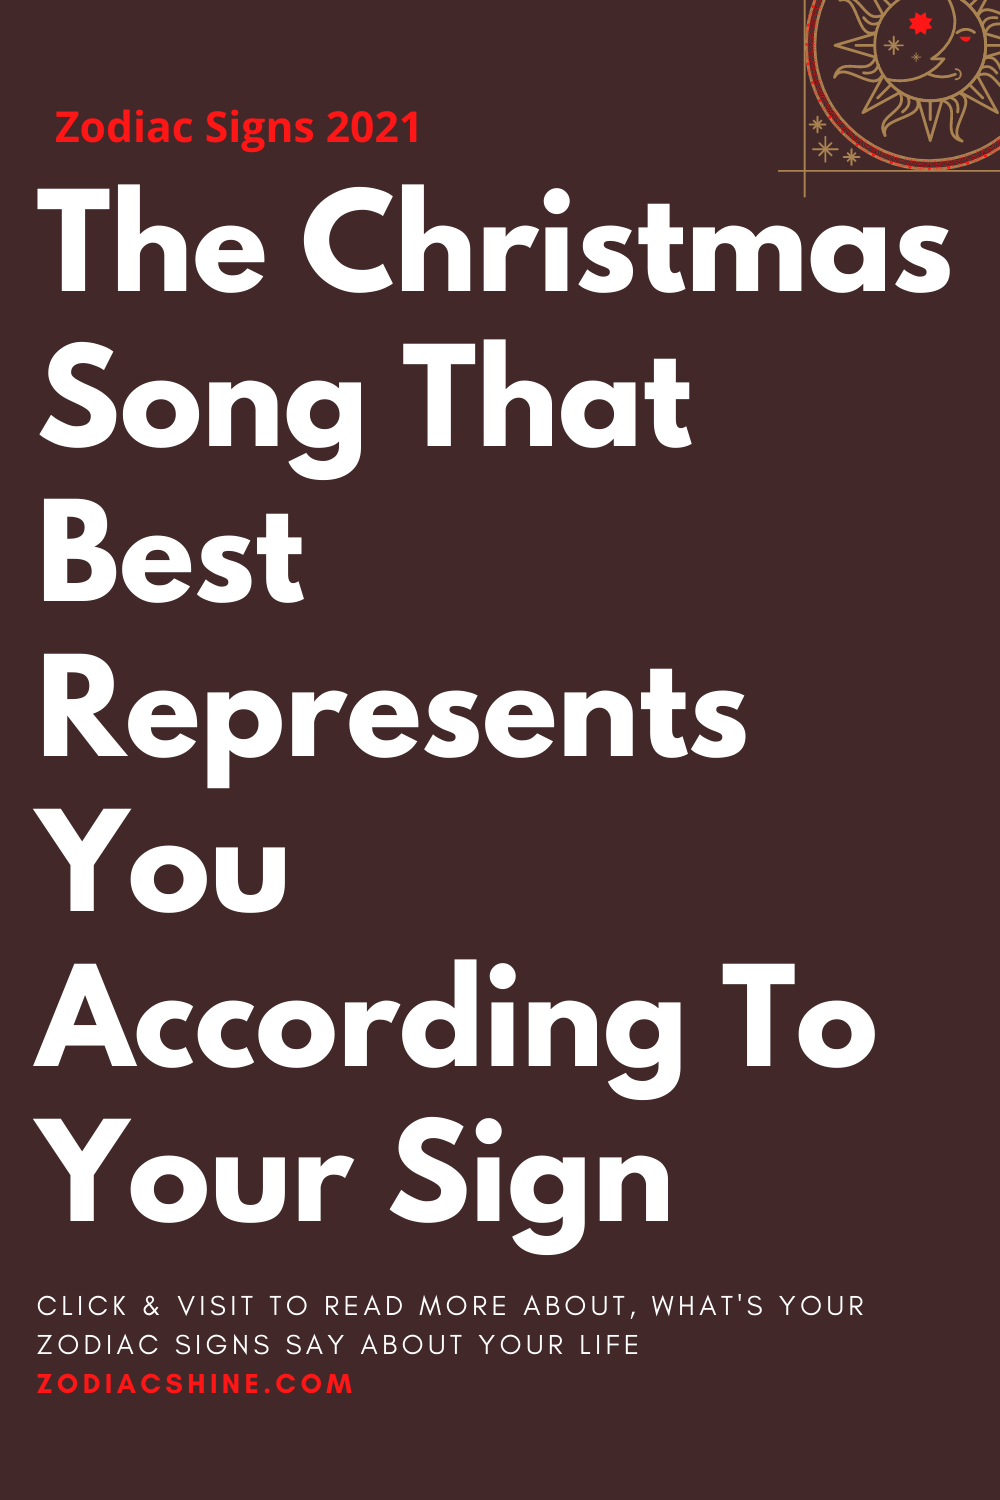 The Christmas Song That Best Represents You According To Your Sign